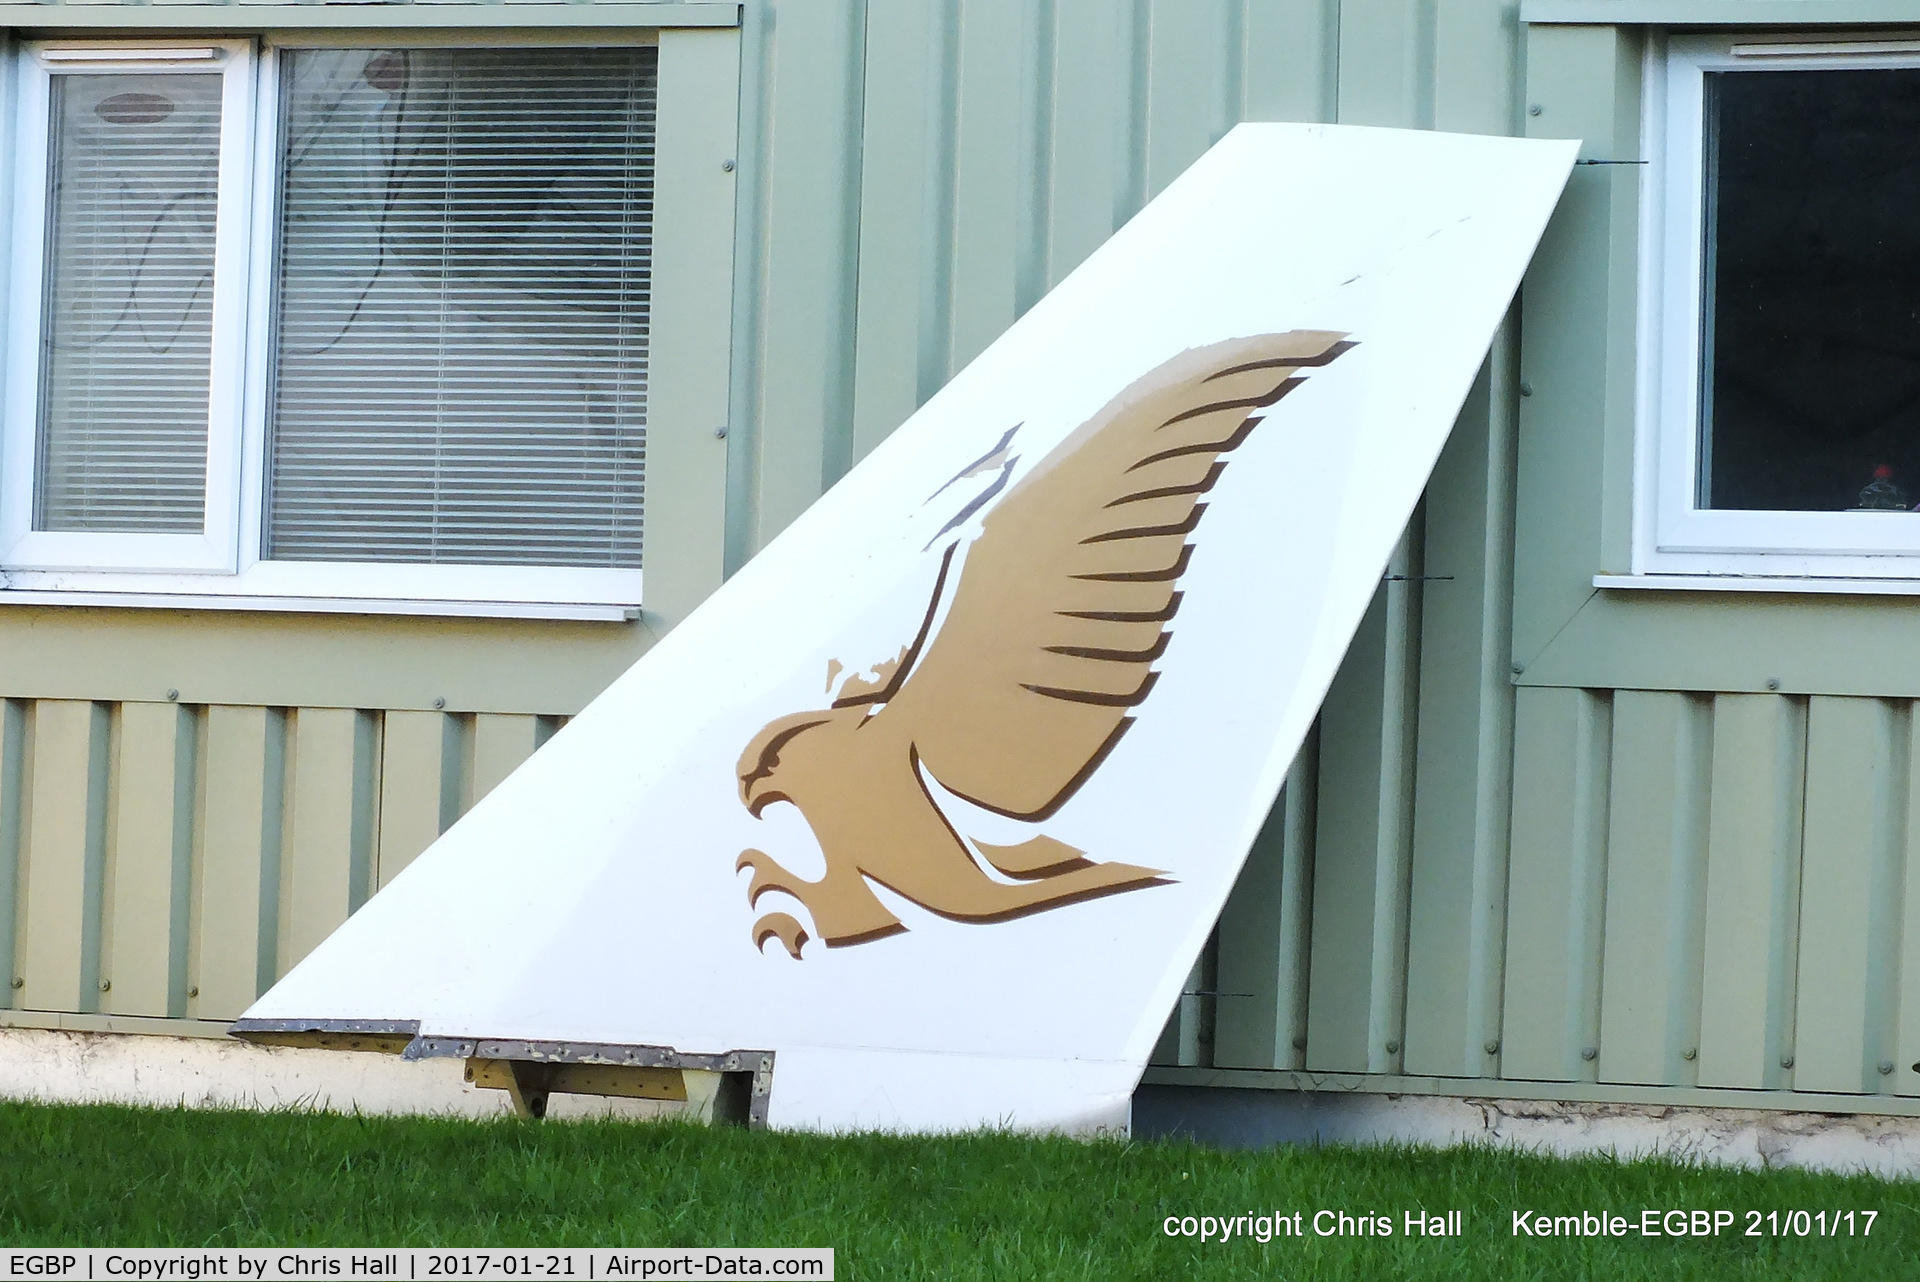 Kemble Airport, Kemble, England United Kingdom (EGBP) - winglet from former Gulf Air A340 next to the ASI hangar at Kemble